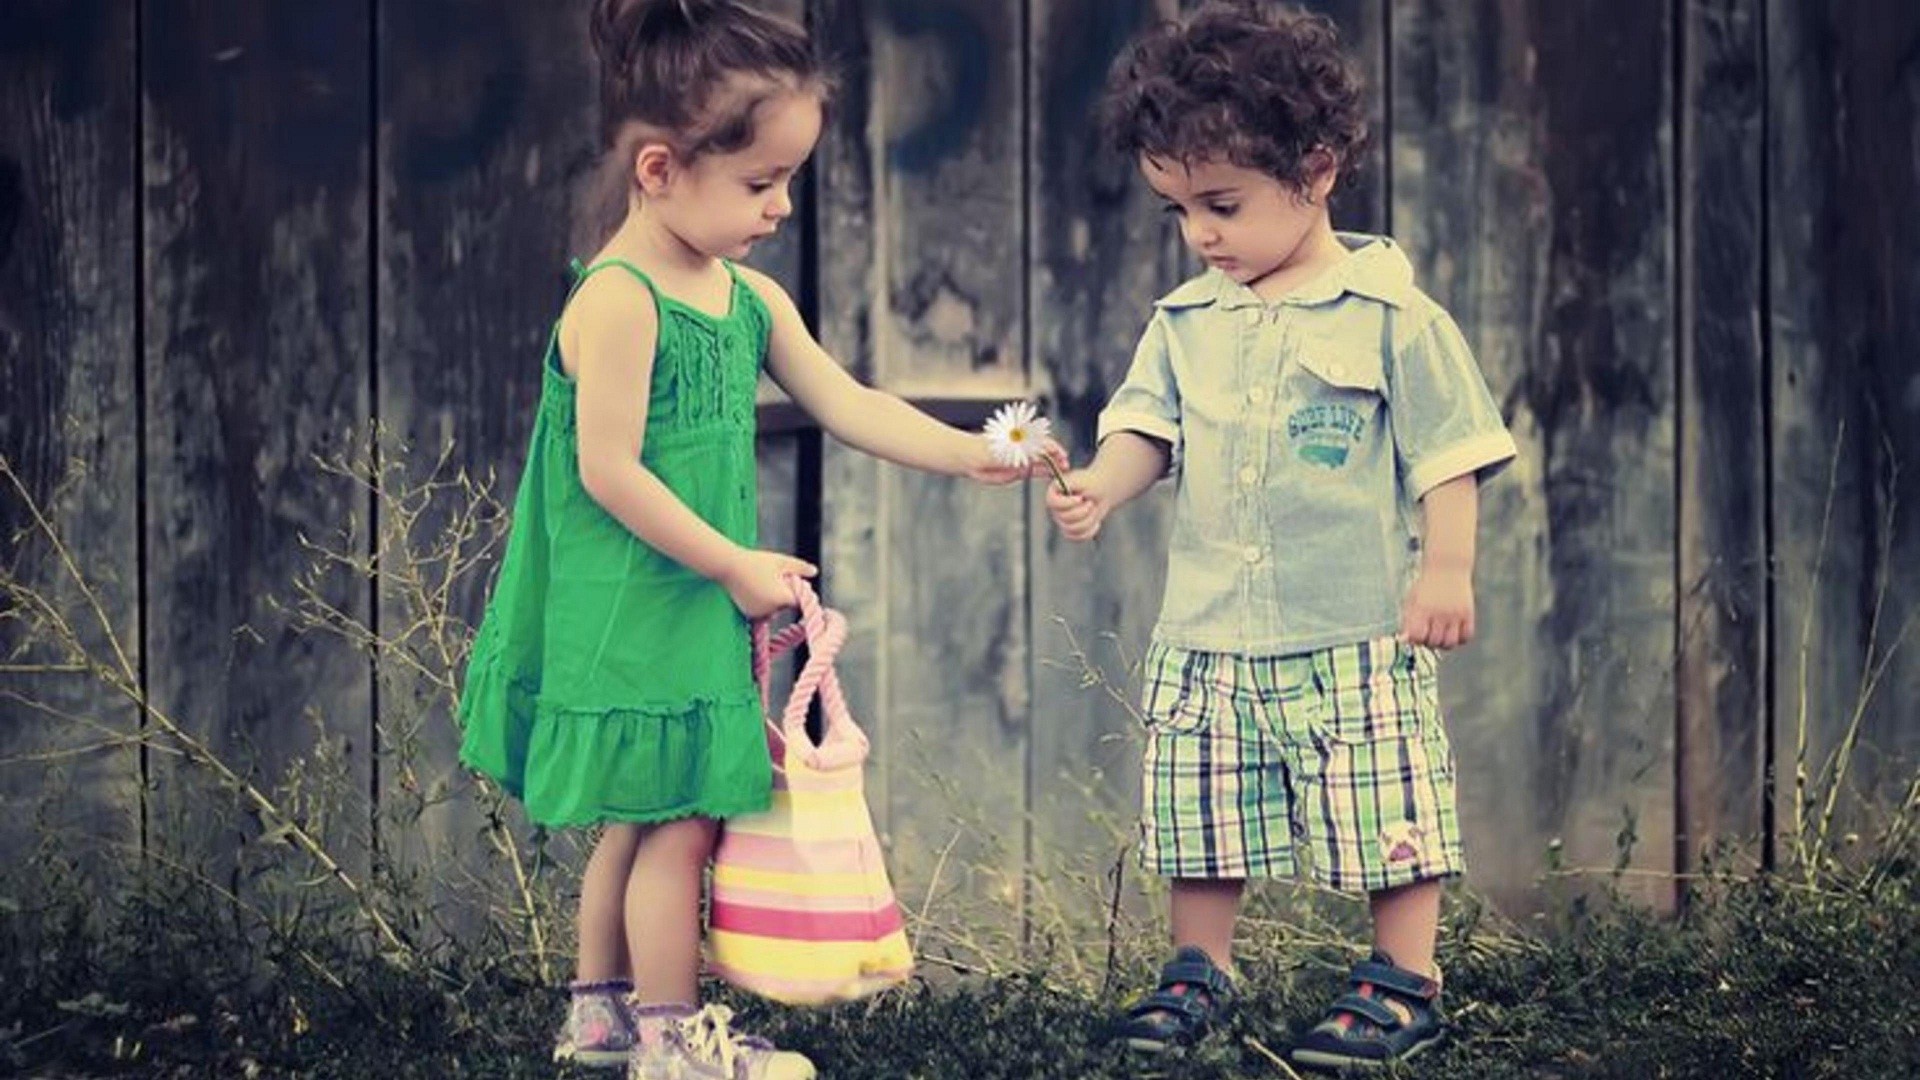 Cute Baby Couple Wallpapers